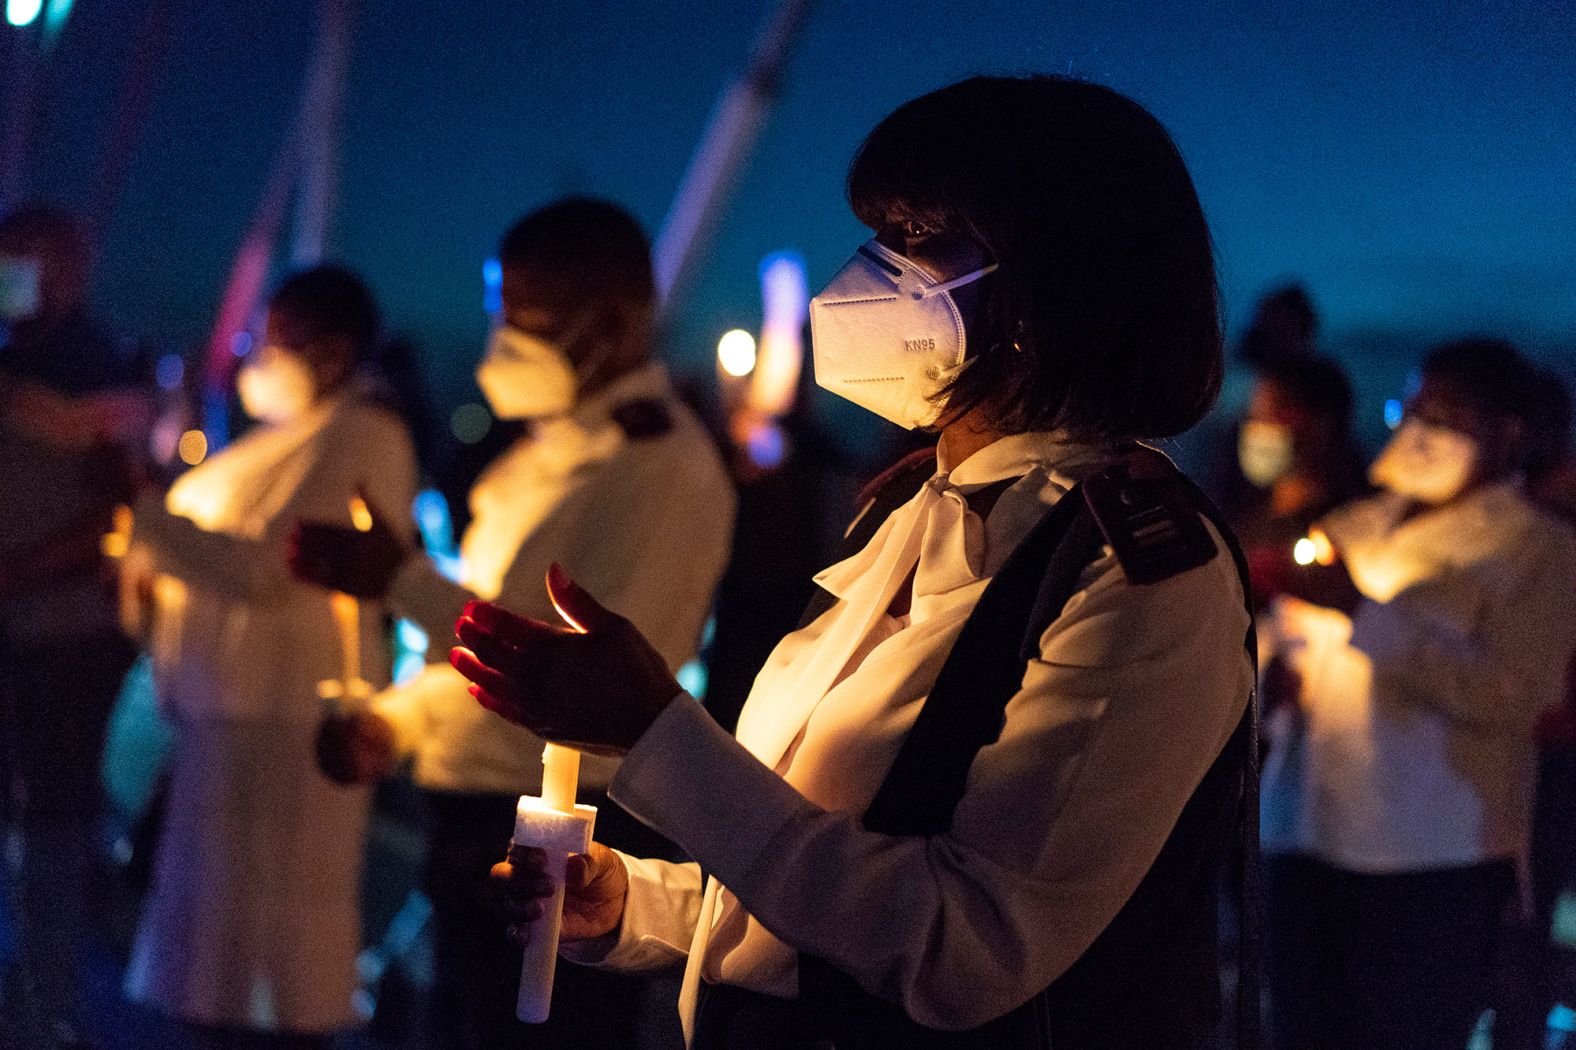 A New Year's Eve memorial is held in Johannesburg for victims of the Covid-19 pandemic.